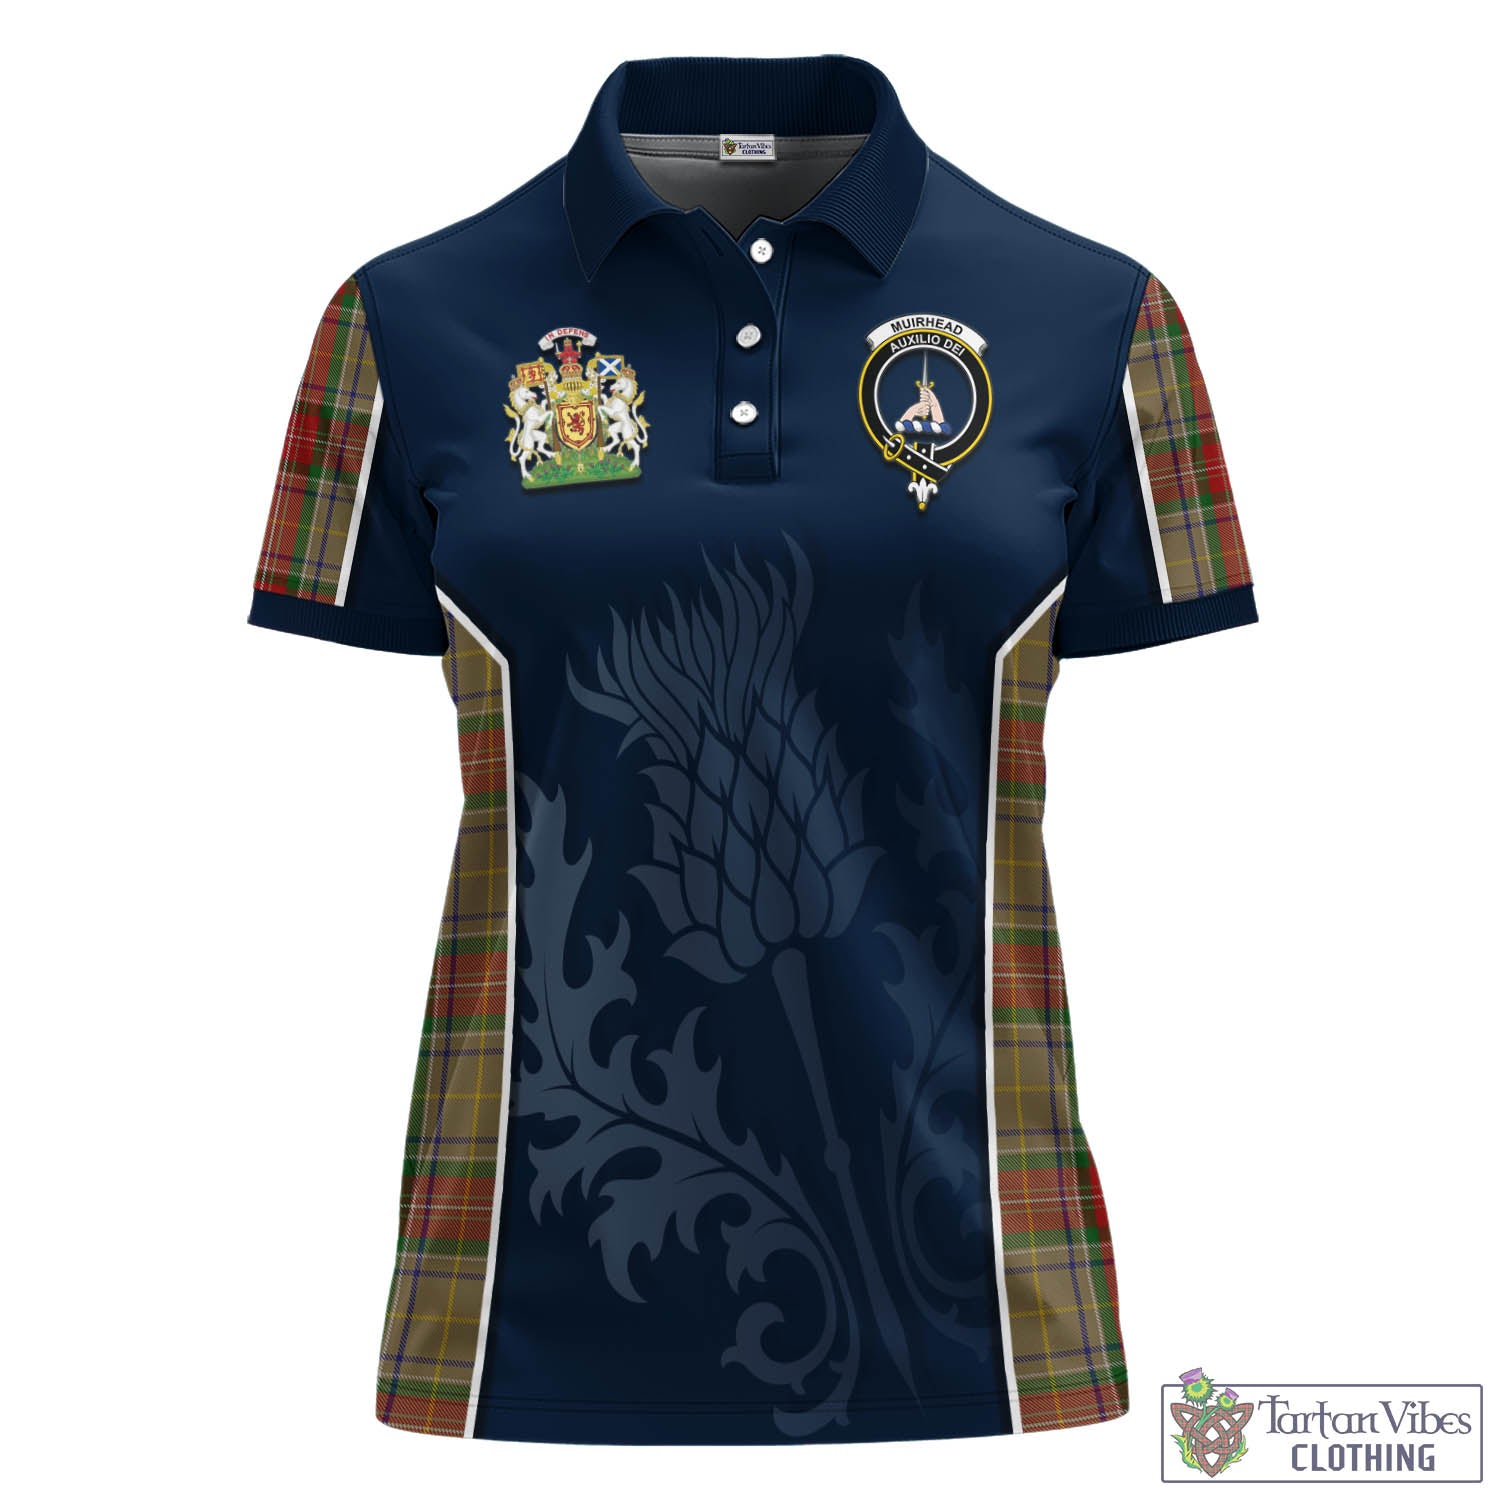 Tartan Vibes Clothing Muirhead Old Tartan Women's Polo Shirt with Family Crest and Scottish Thistle Vibes Sport Style